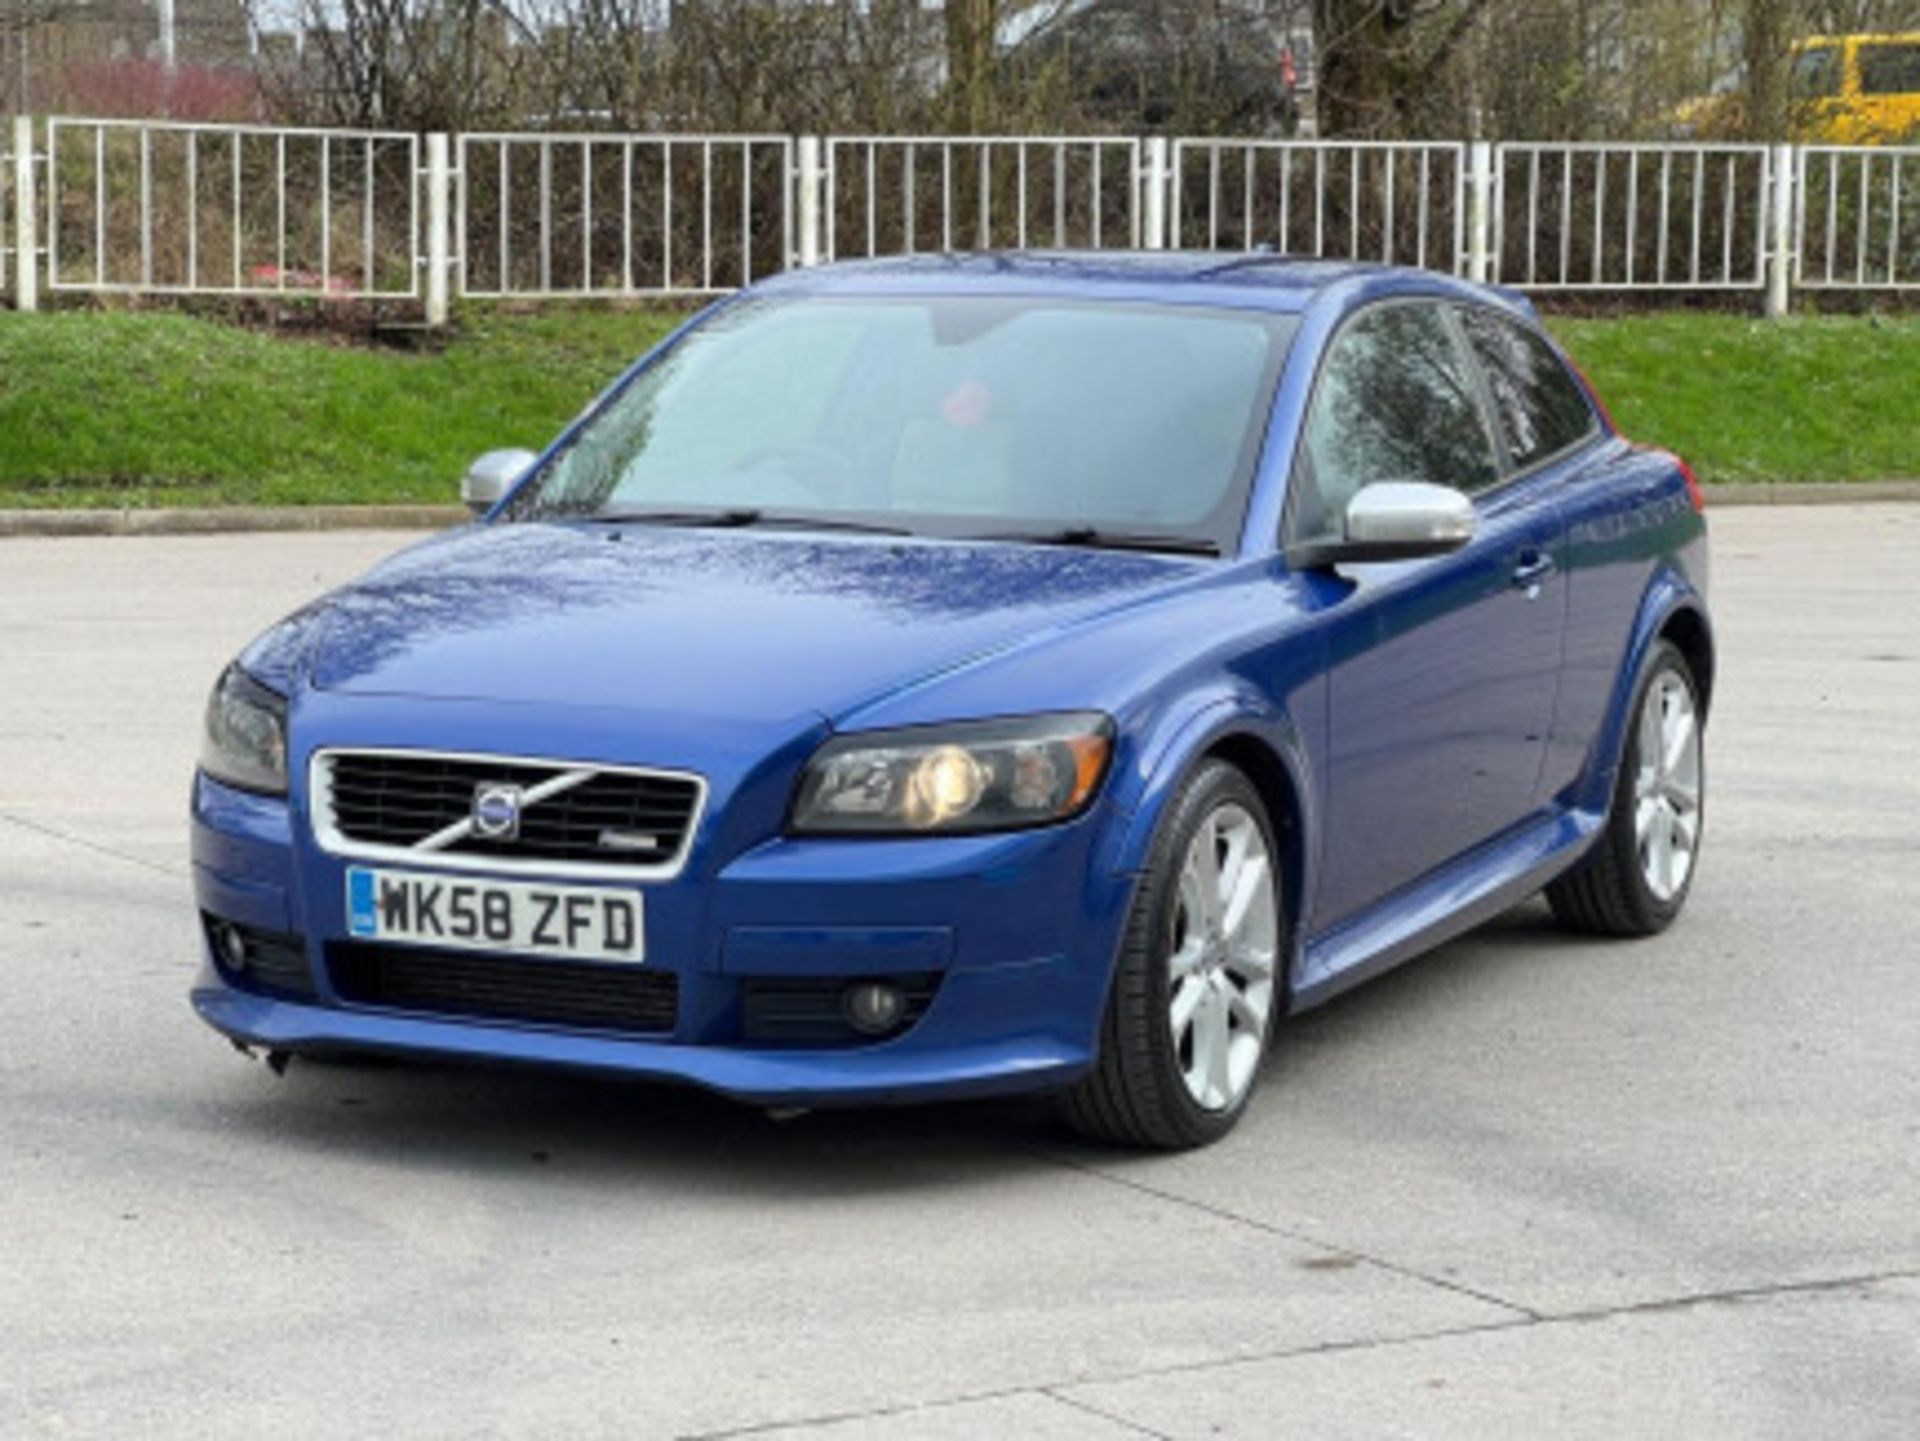 VOLVO C30 2.0D R-DESIGN SPORT 2DR - SPORTY AND LUXURIOUS COMPACT CAR >>--NO VAT ON HAMMER--<< - Image 35 of 103